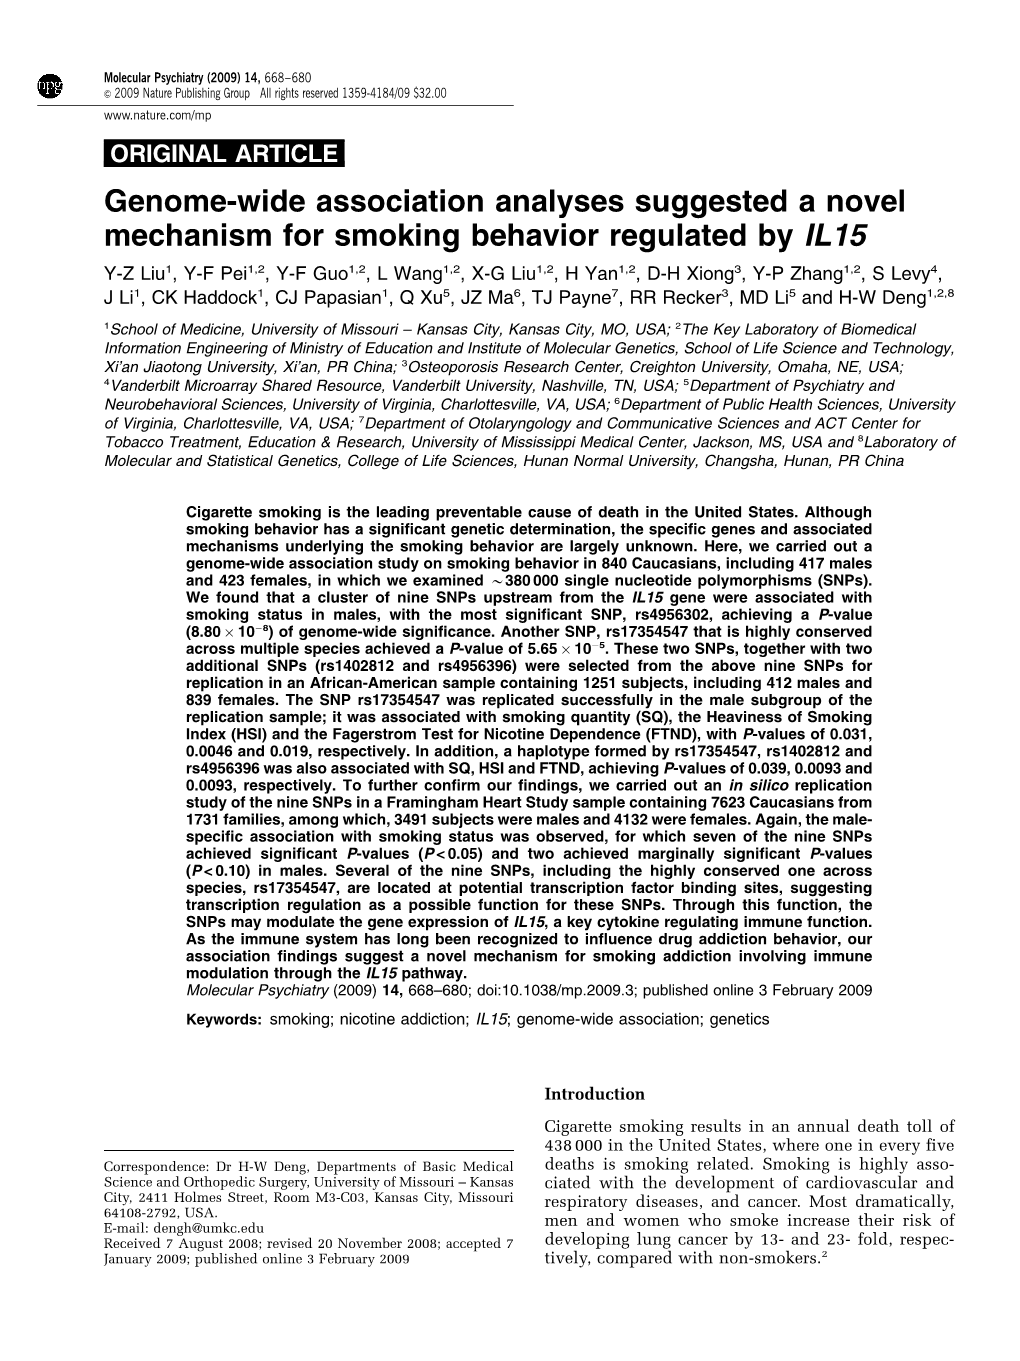 Genome-Wide Association Analyses Suggested a Novel Mechanism For